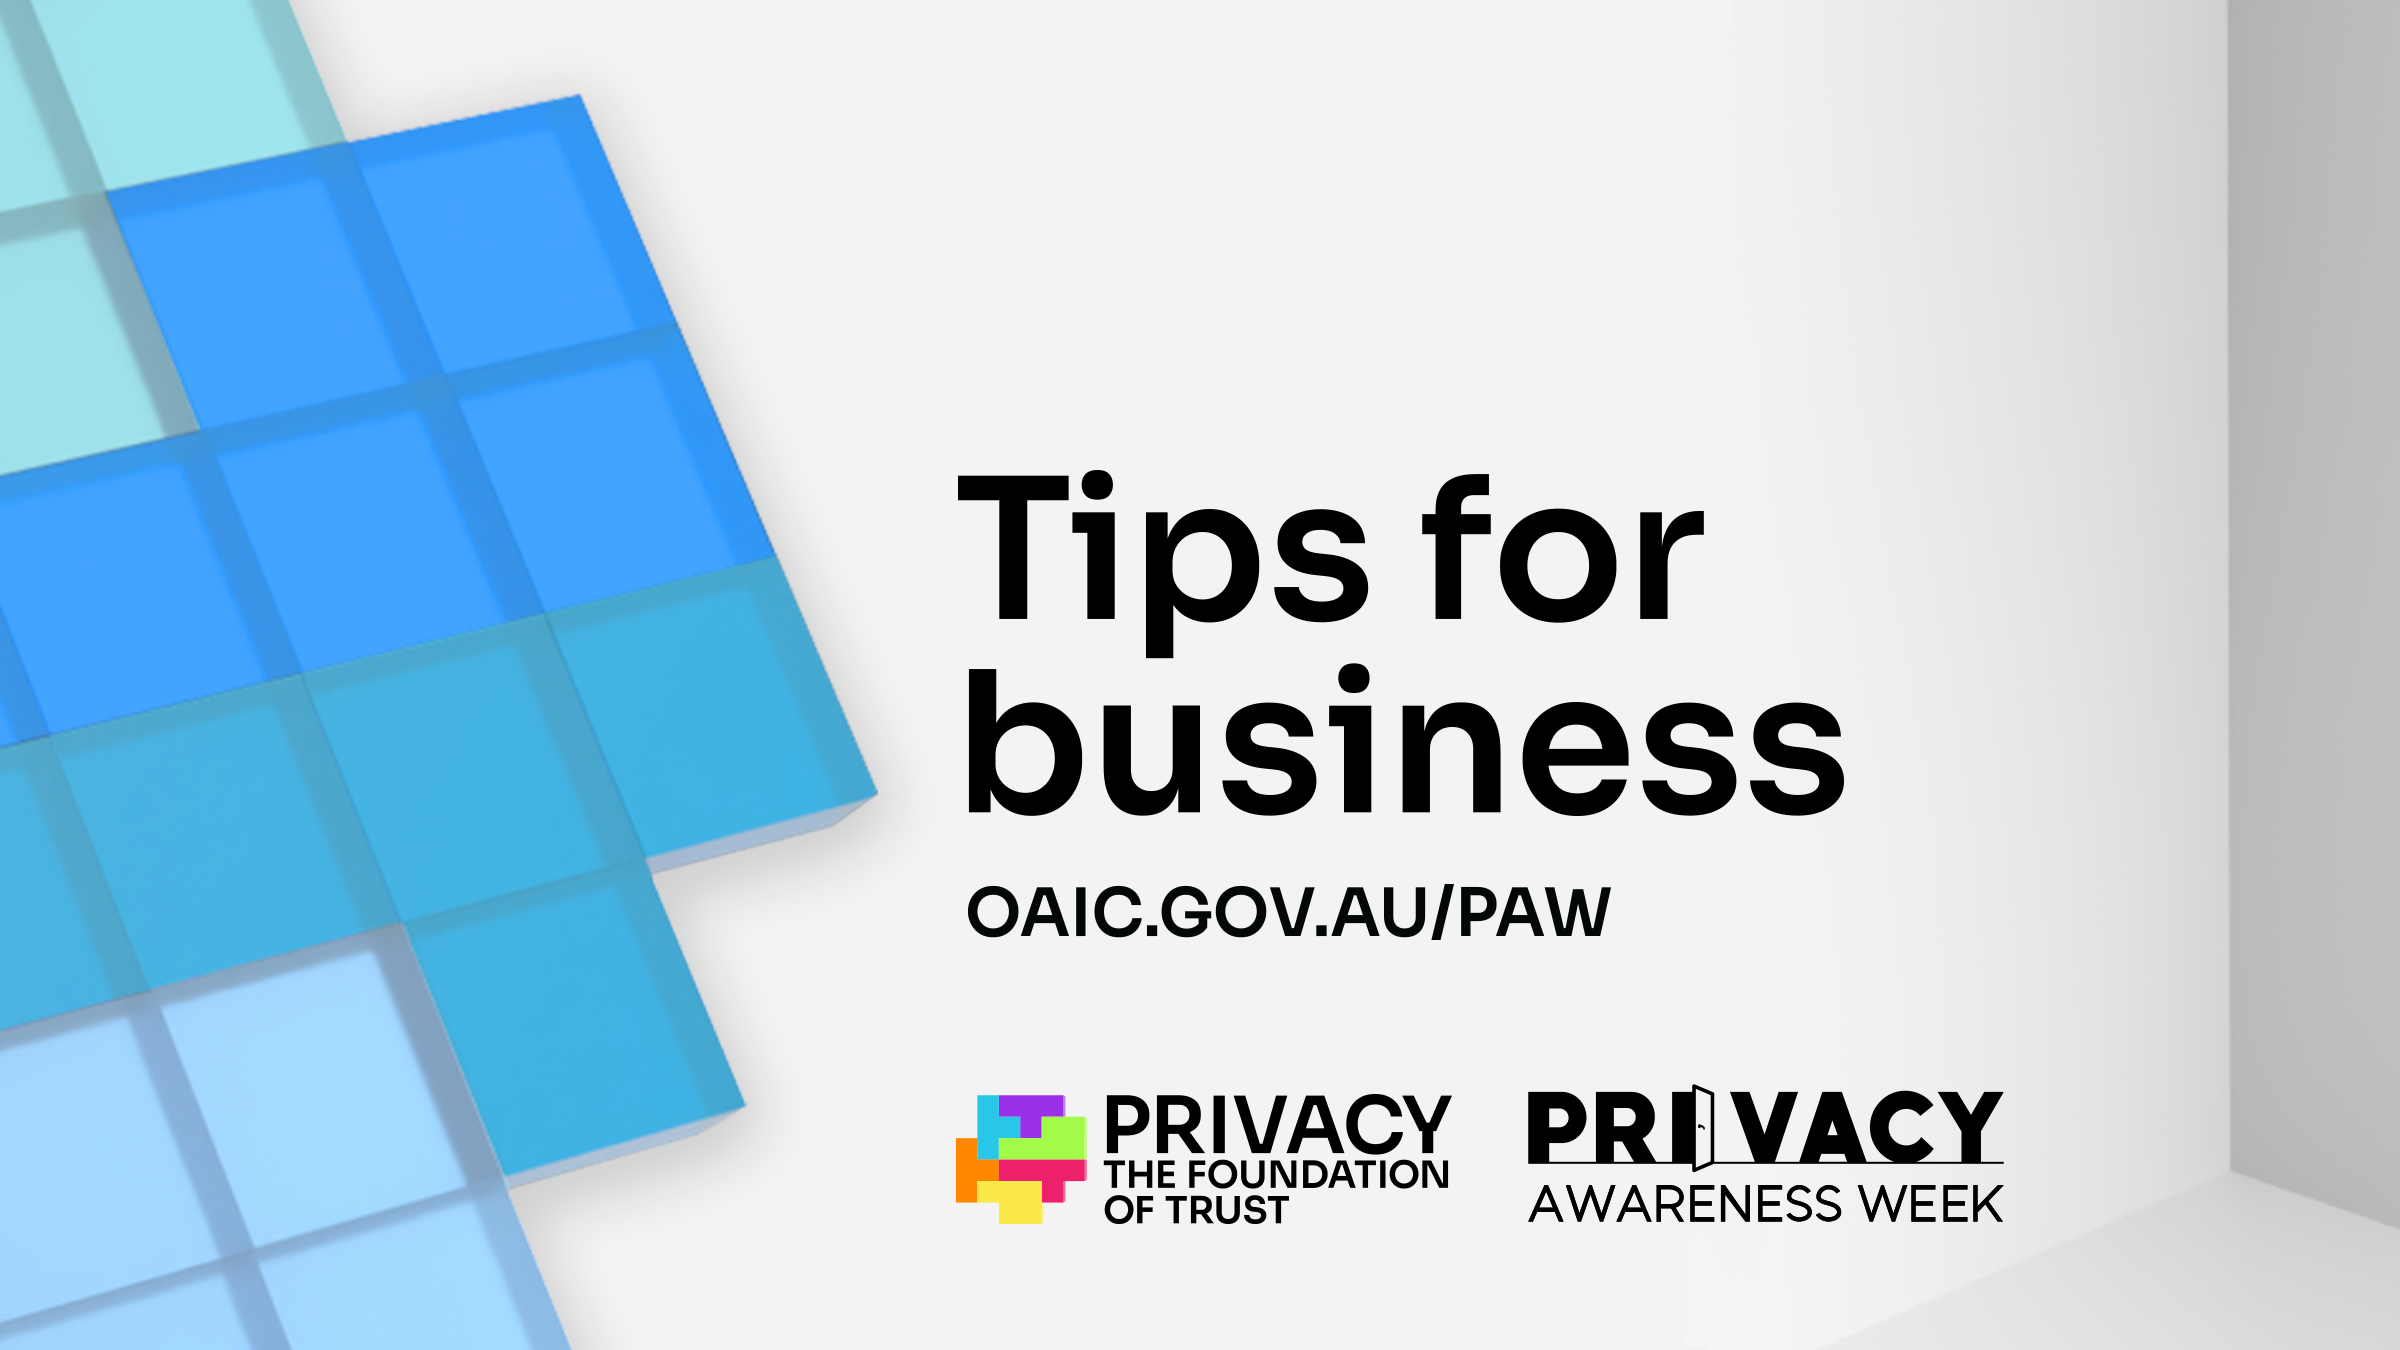 Building trust in your business through good privacy practices